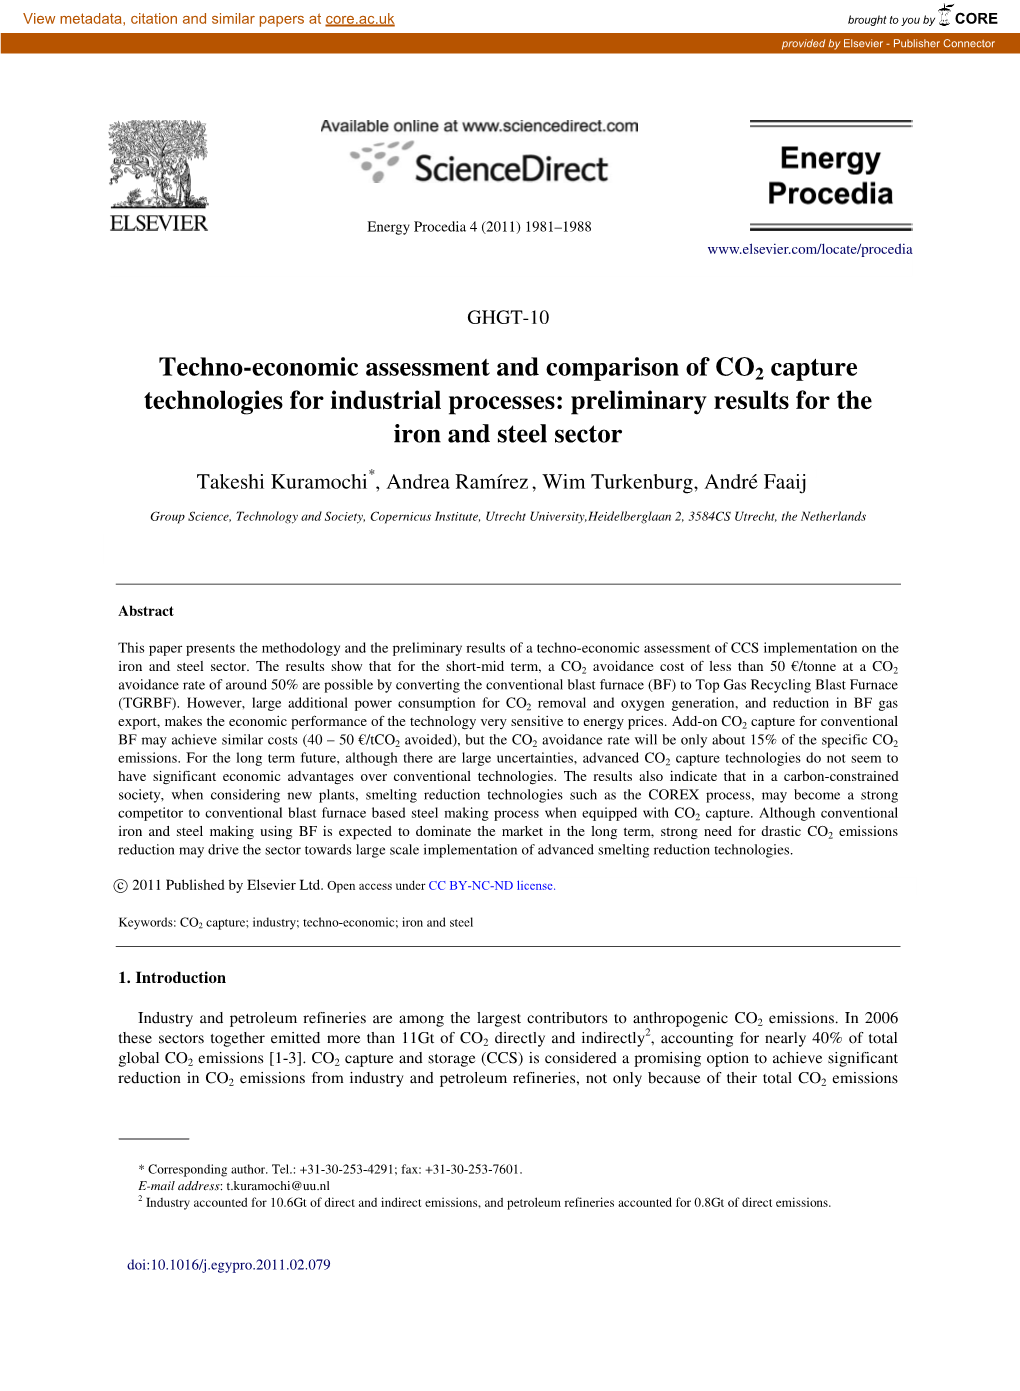 Techno-Economic Assessment and Comparison of CO2 Capture Technologies for Industrial Processes: Preliminary Results for the Iron and Steel Sector